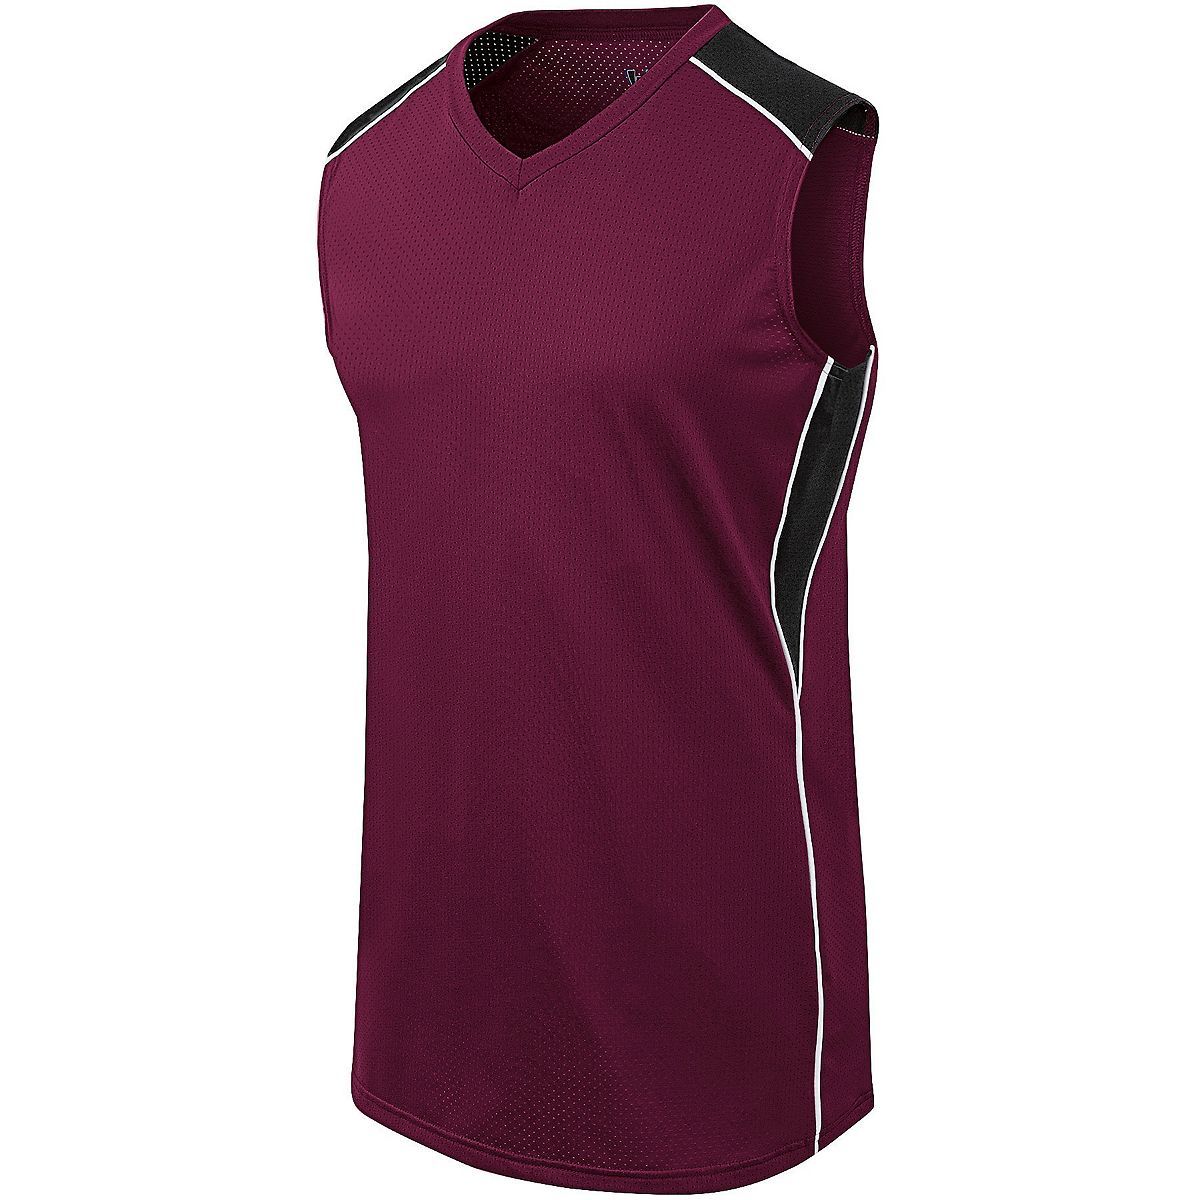 Augusta Sportswear Ladies Dynamite Jersey in Maroon/Black/White  -Part of the Ladies, Ladies-Jersey, Augusta-Products, Softball, Shirts product lines at KanaleyCreations.com